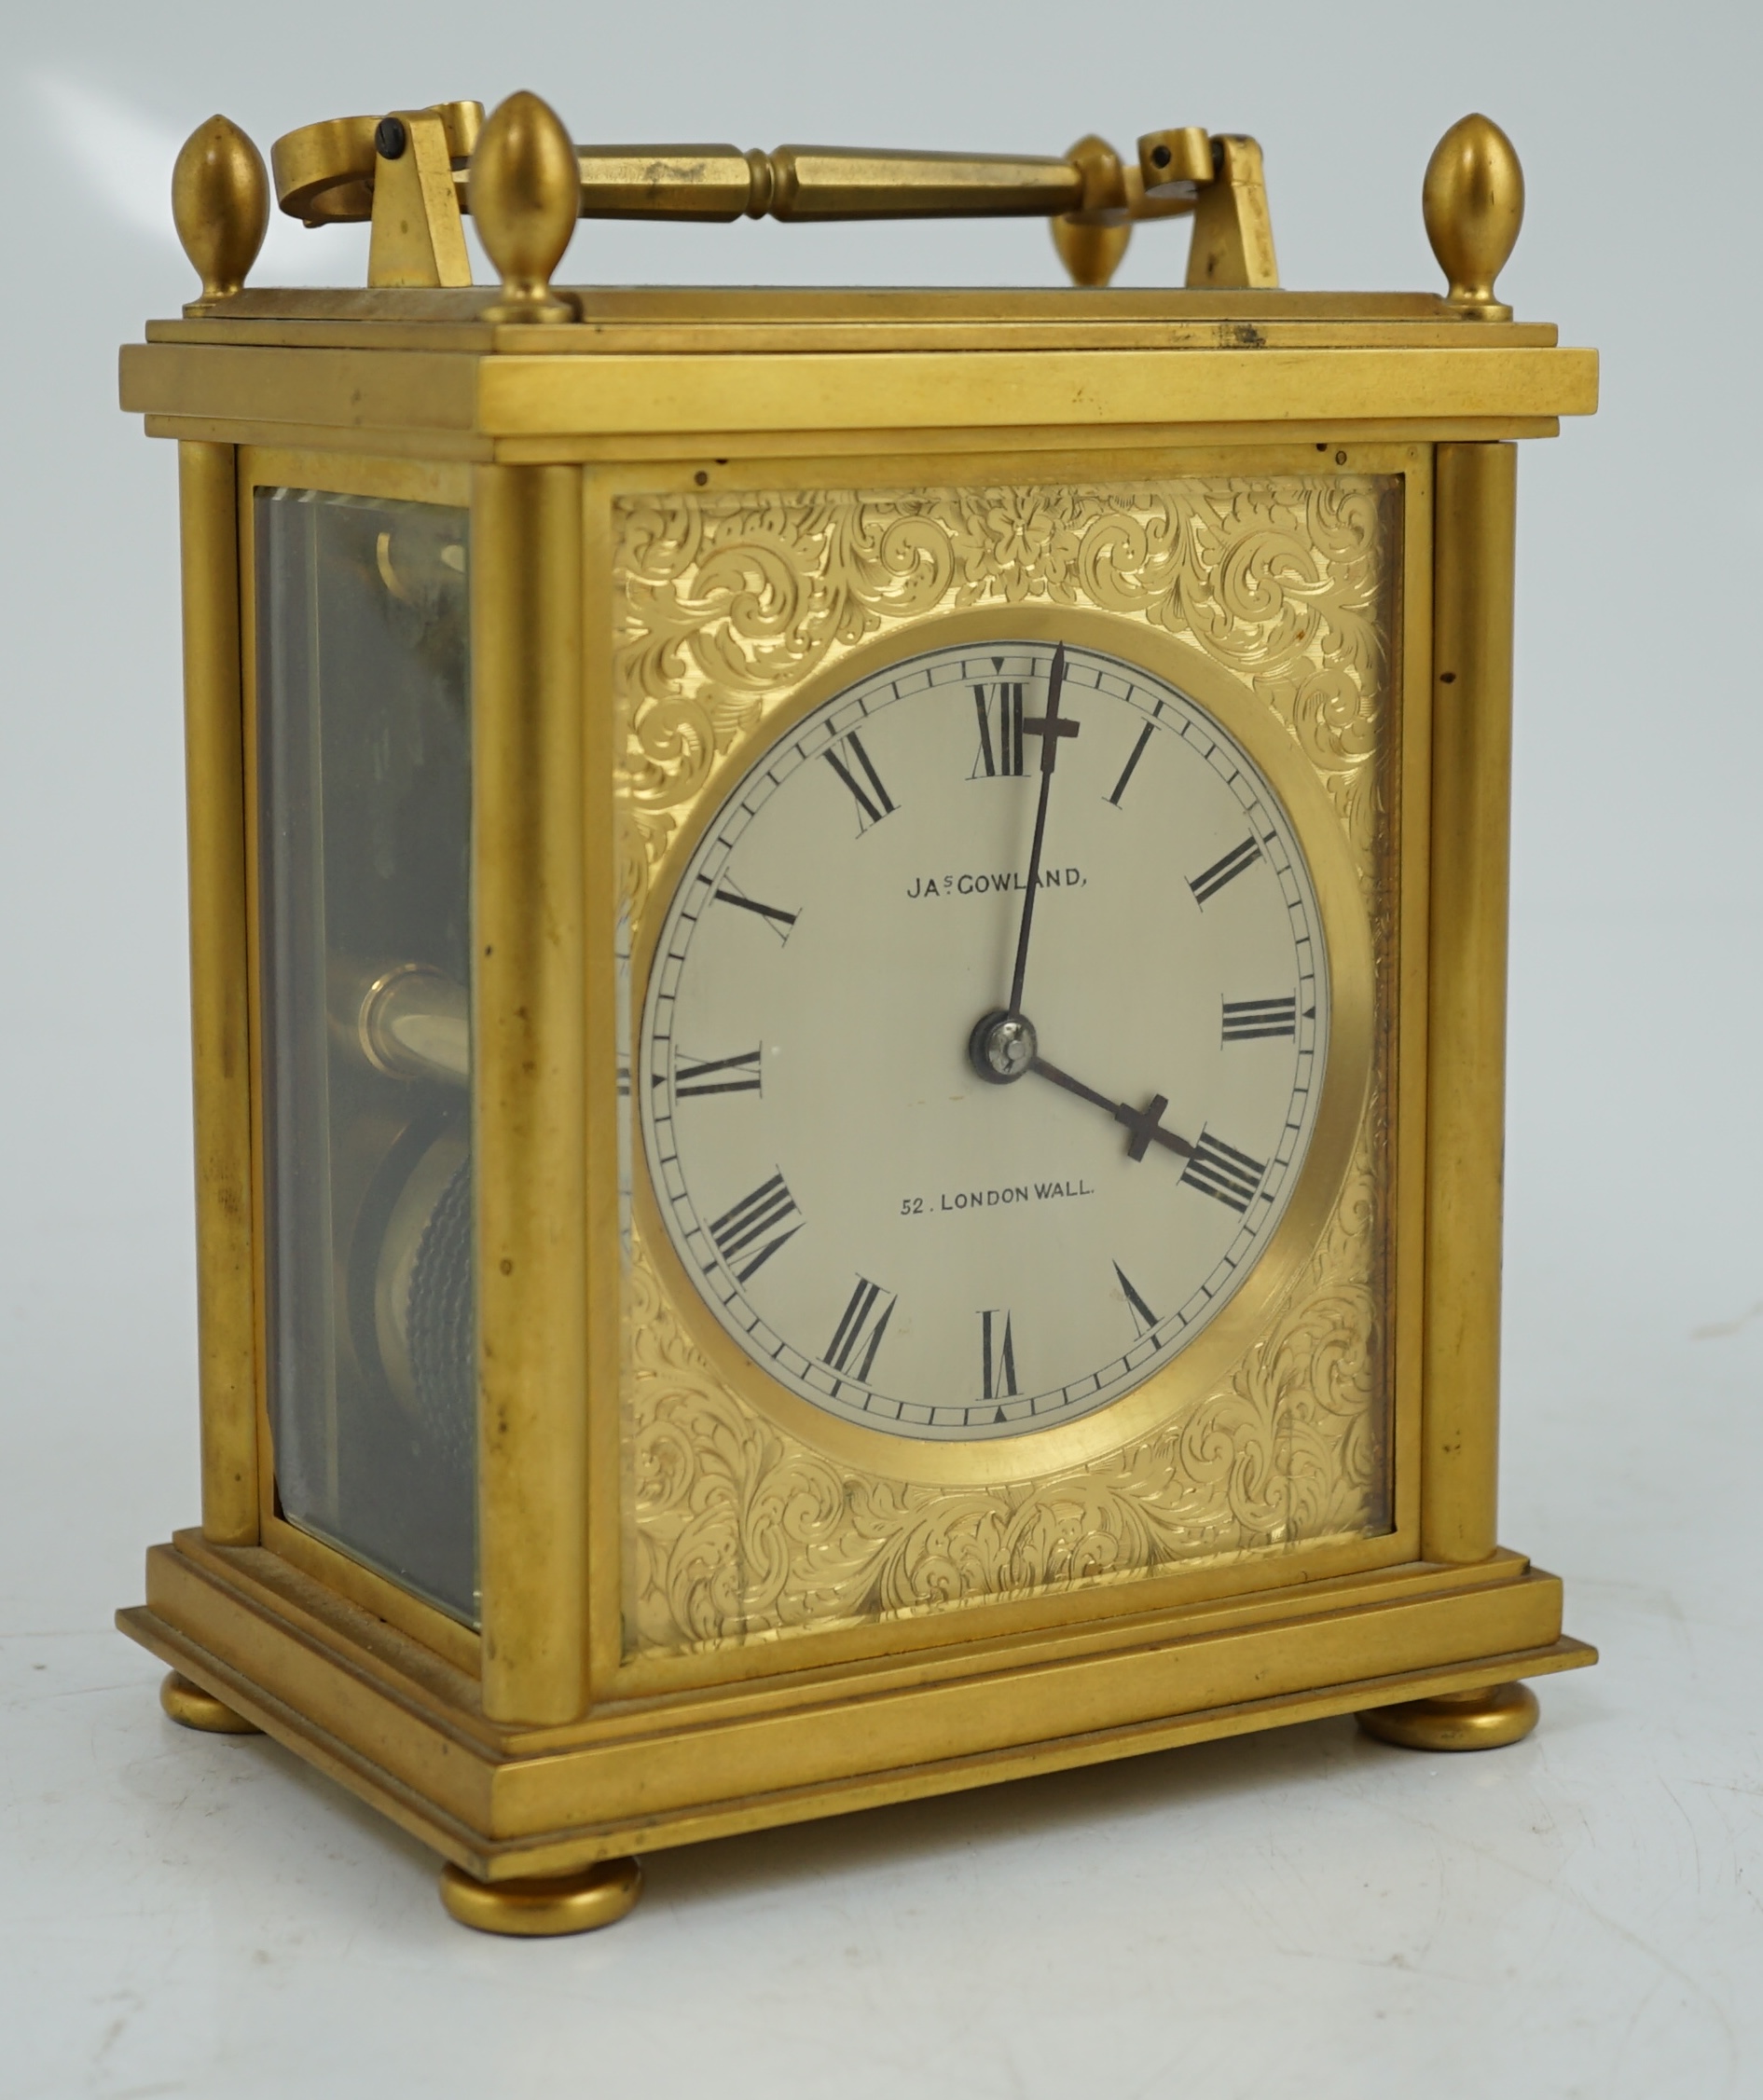 James Gowland of London, a rare mid 19th century giant gilt bronze single fuseé carriage timepiece, 22cm high to handle